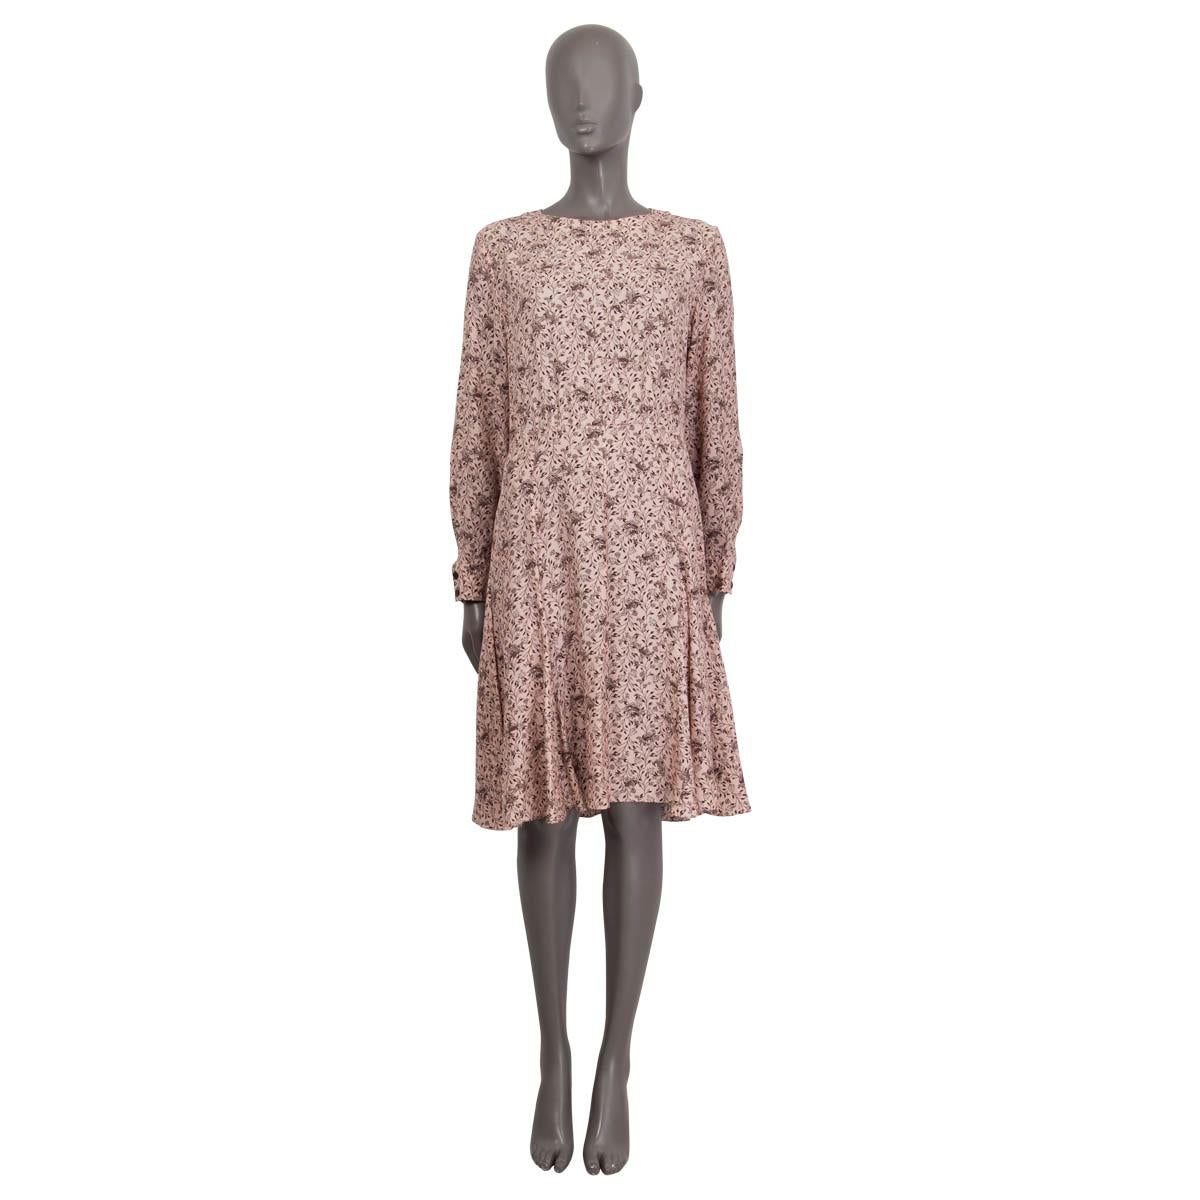 100% authentic Chloé 2021 long sleeve dress in pink and brown silk crepe (100%). Features a bird & flower motif print, a boat neck and buttoned cuffs. Opens with a concealed zipper and a hook at the back. Unlined. Has been worn once and is in